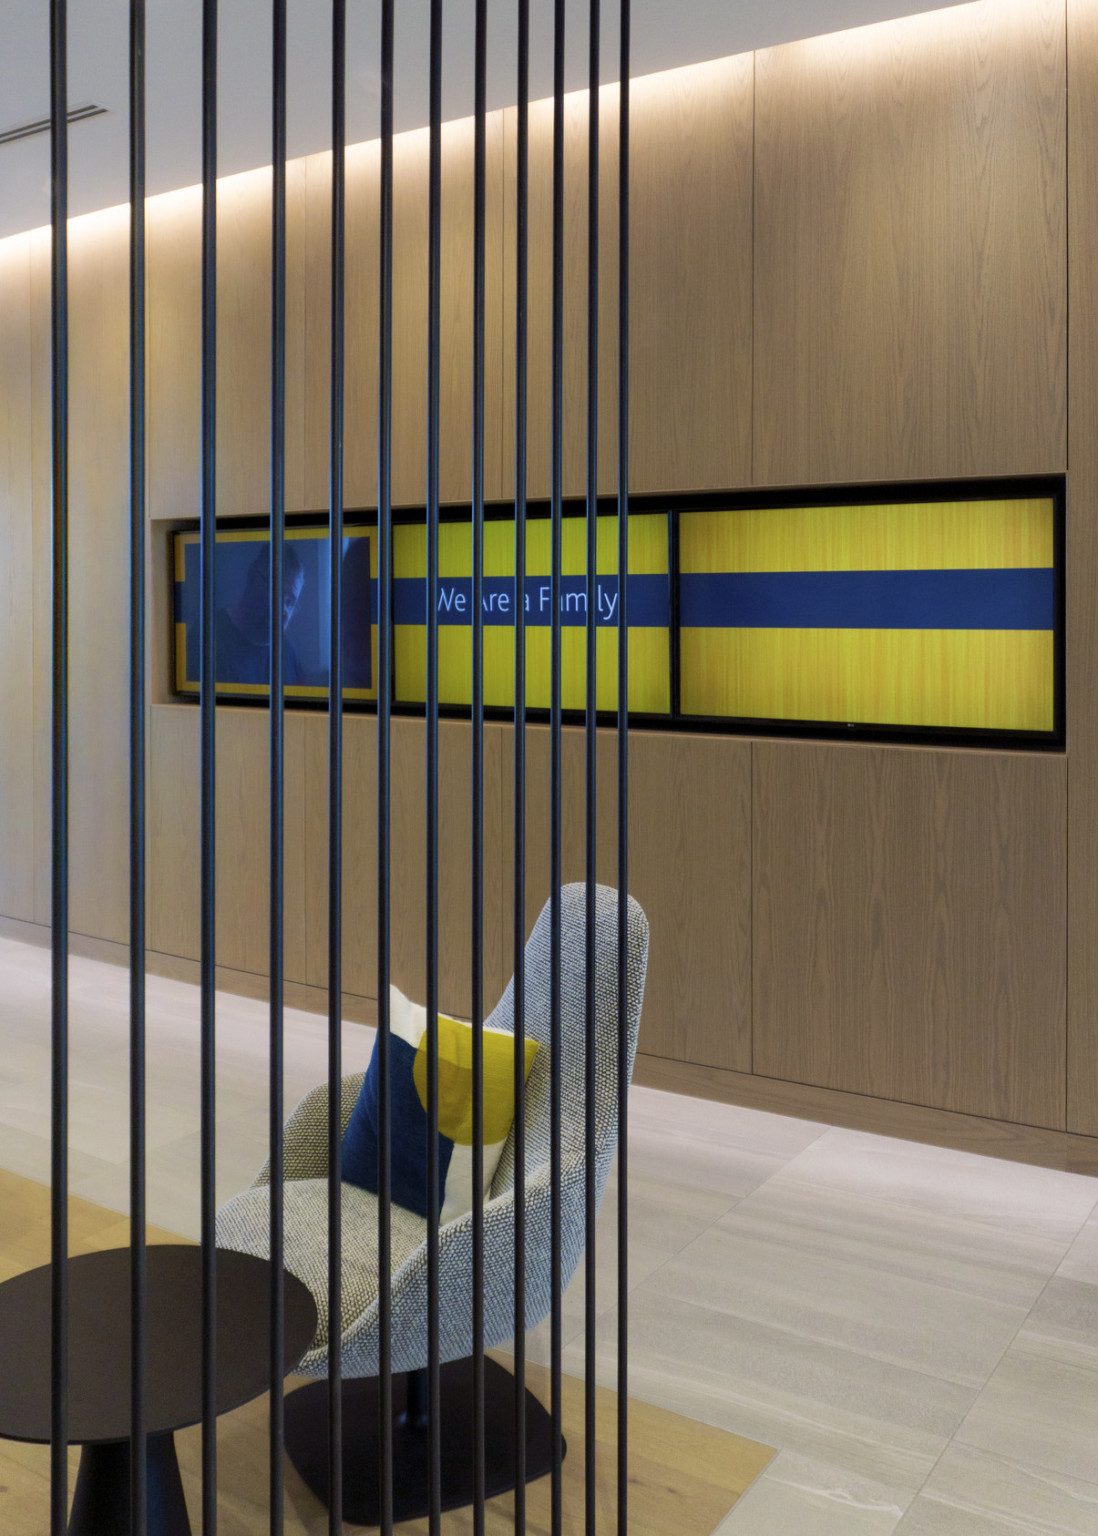 Hallway with wood wall and recessed blue and yellow panel across from seating behind black metal bar partition